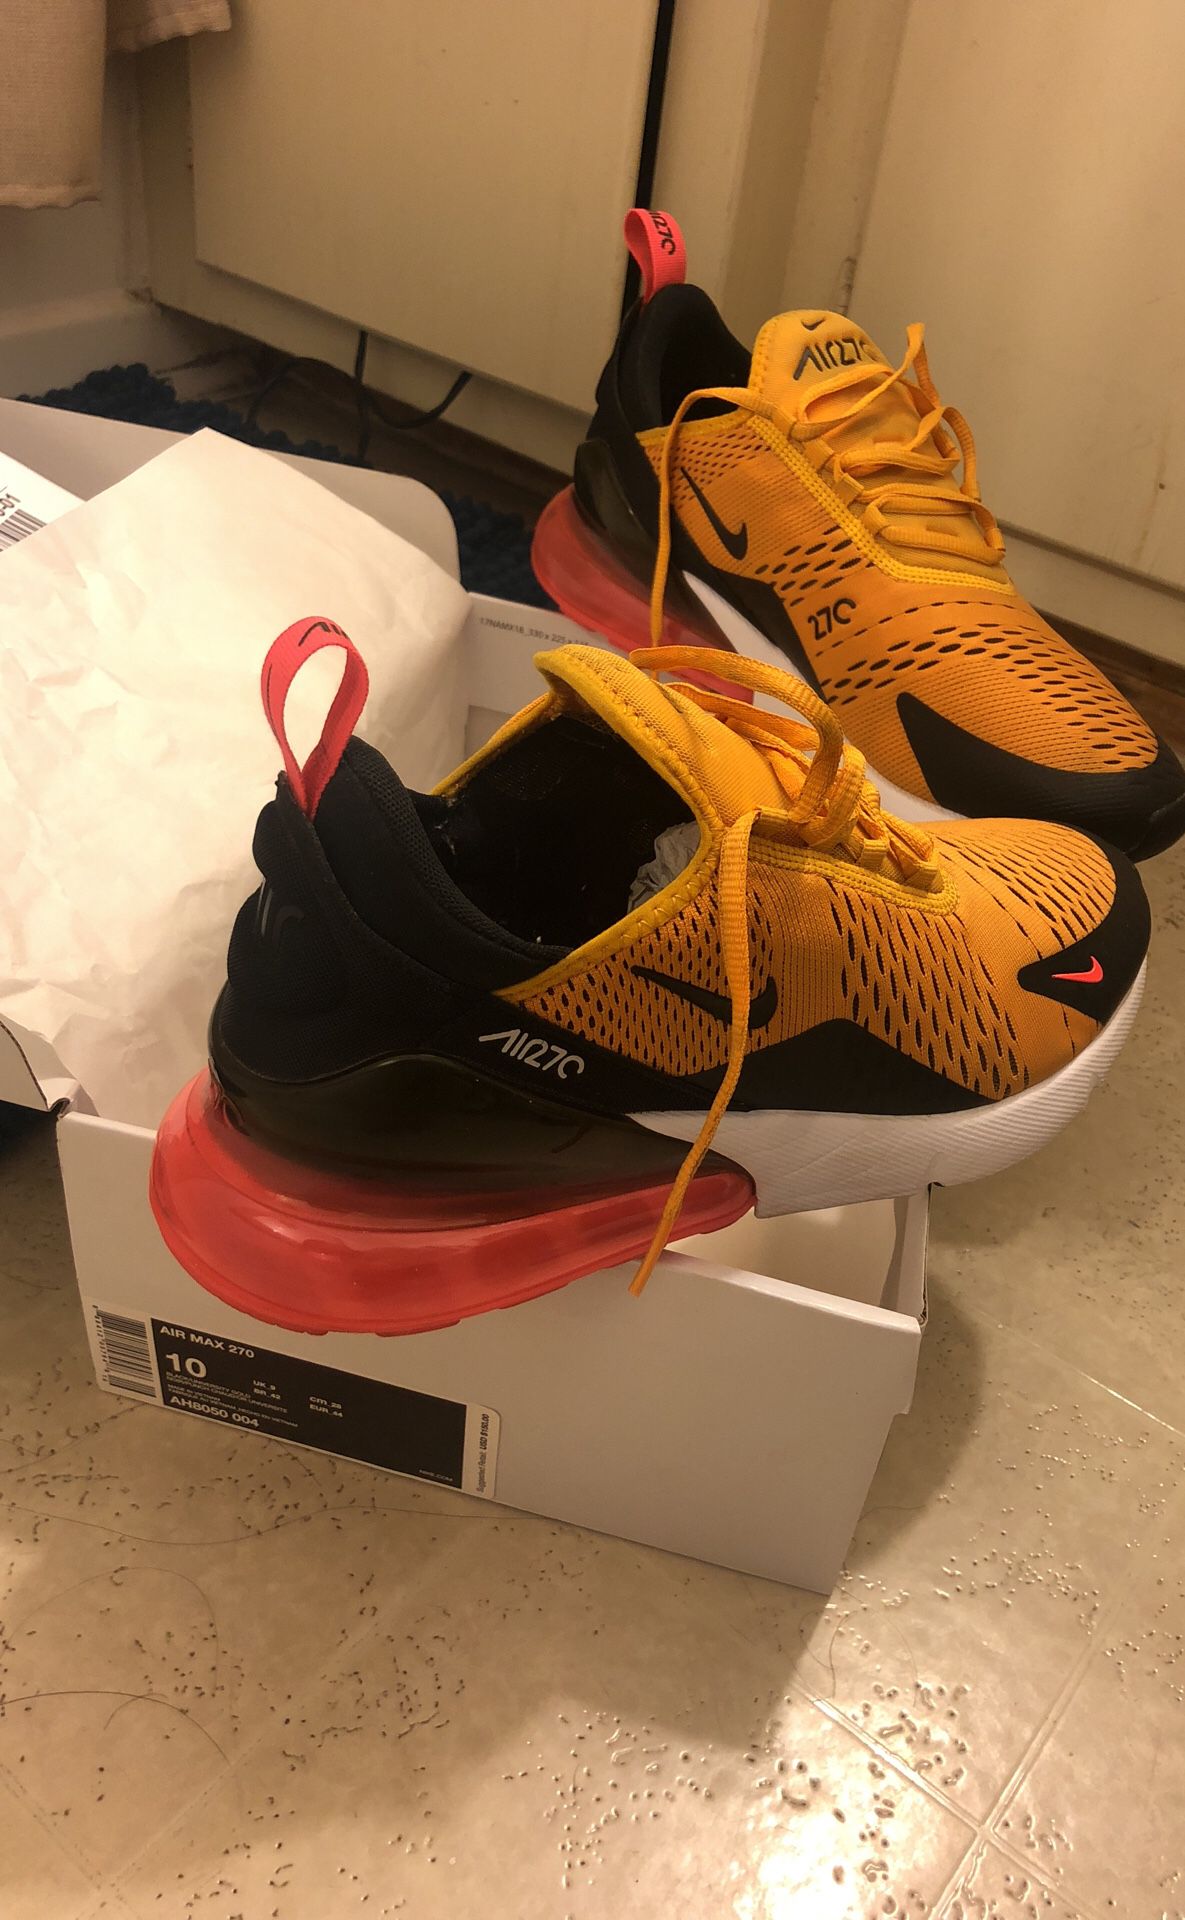 Nike air max 270 tiger 10 for Arcadia, CA - OfferUp